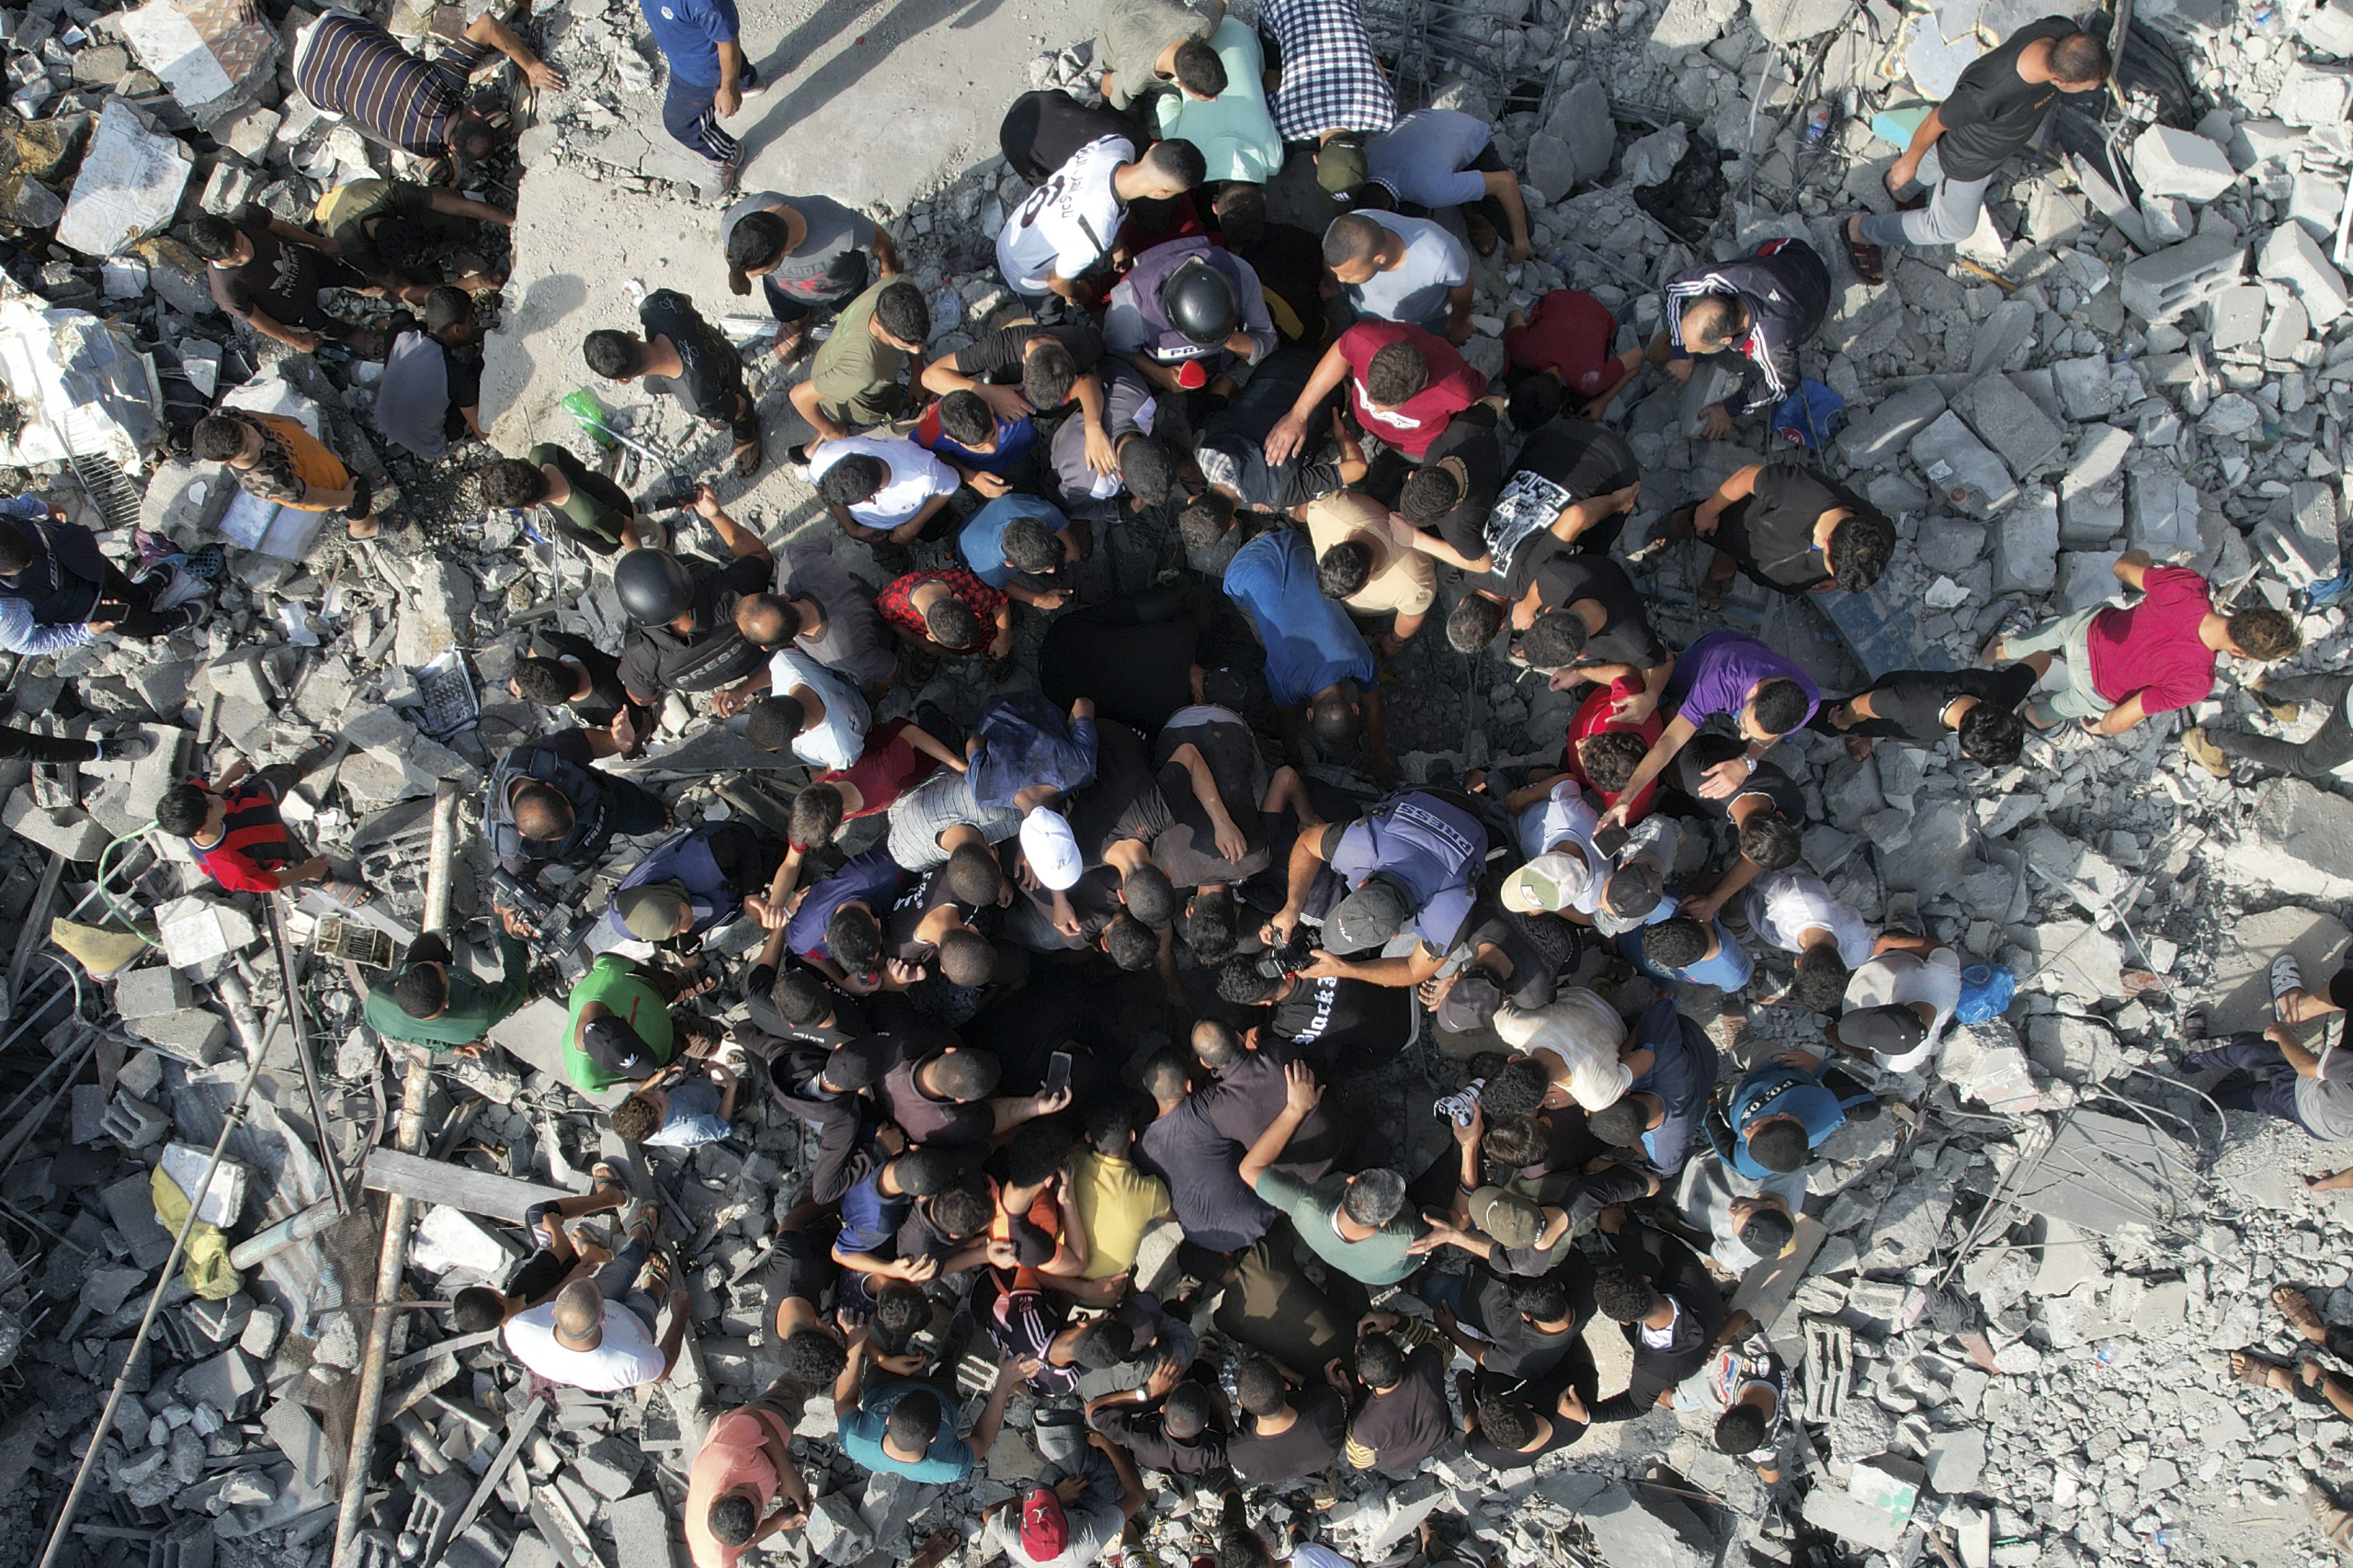 Palestinians look for survivors of the Israeli bombardment in the Maghazi refugee camp in the Gaza Strip on Sunday, Nov. 5, 2023. (AP Photo/Hatem Moussa)

Associated Press/LaPresse
Only Italy and Spain